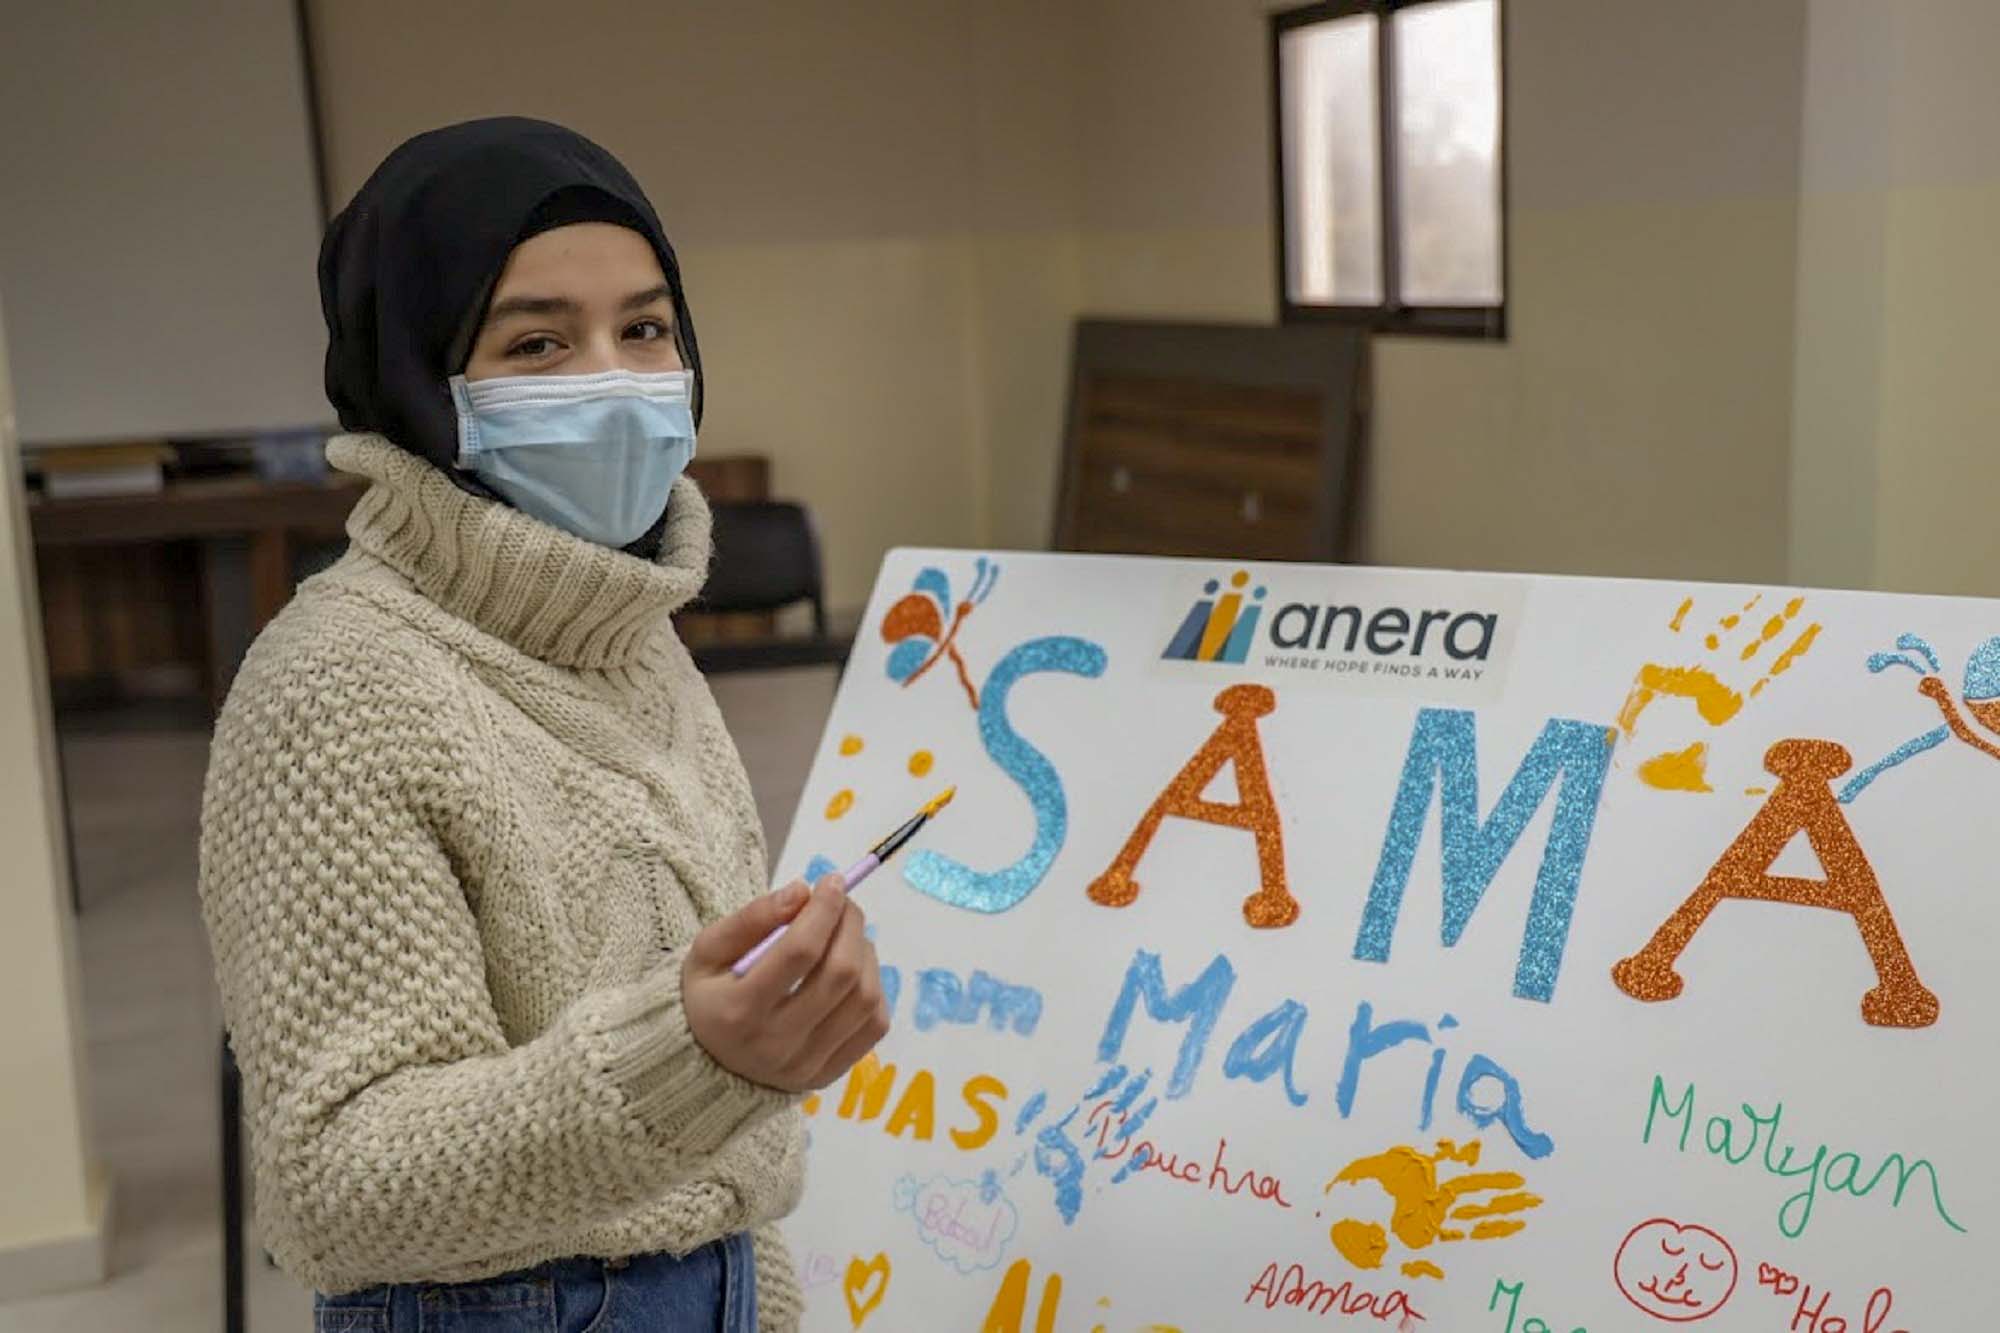 14-year-old Tala is a participant in the Sama Project.